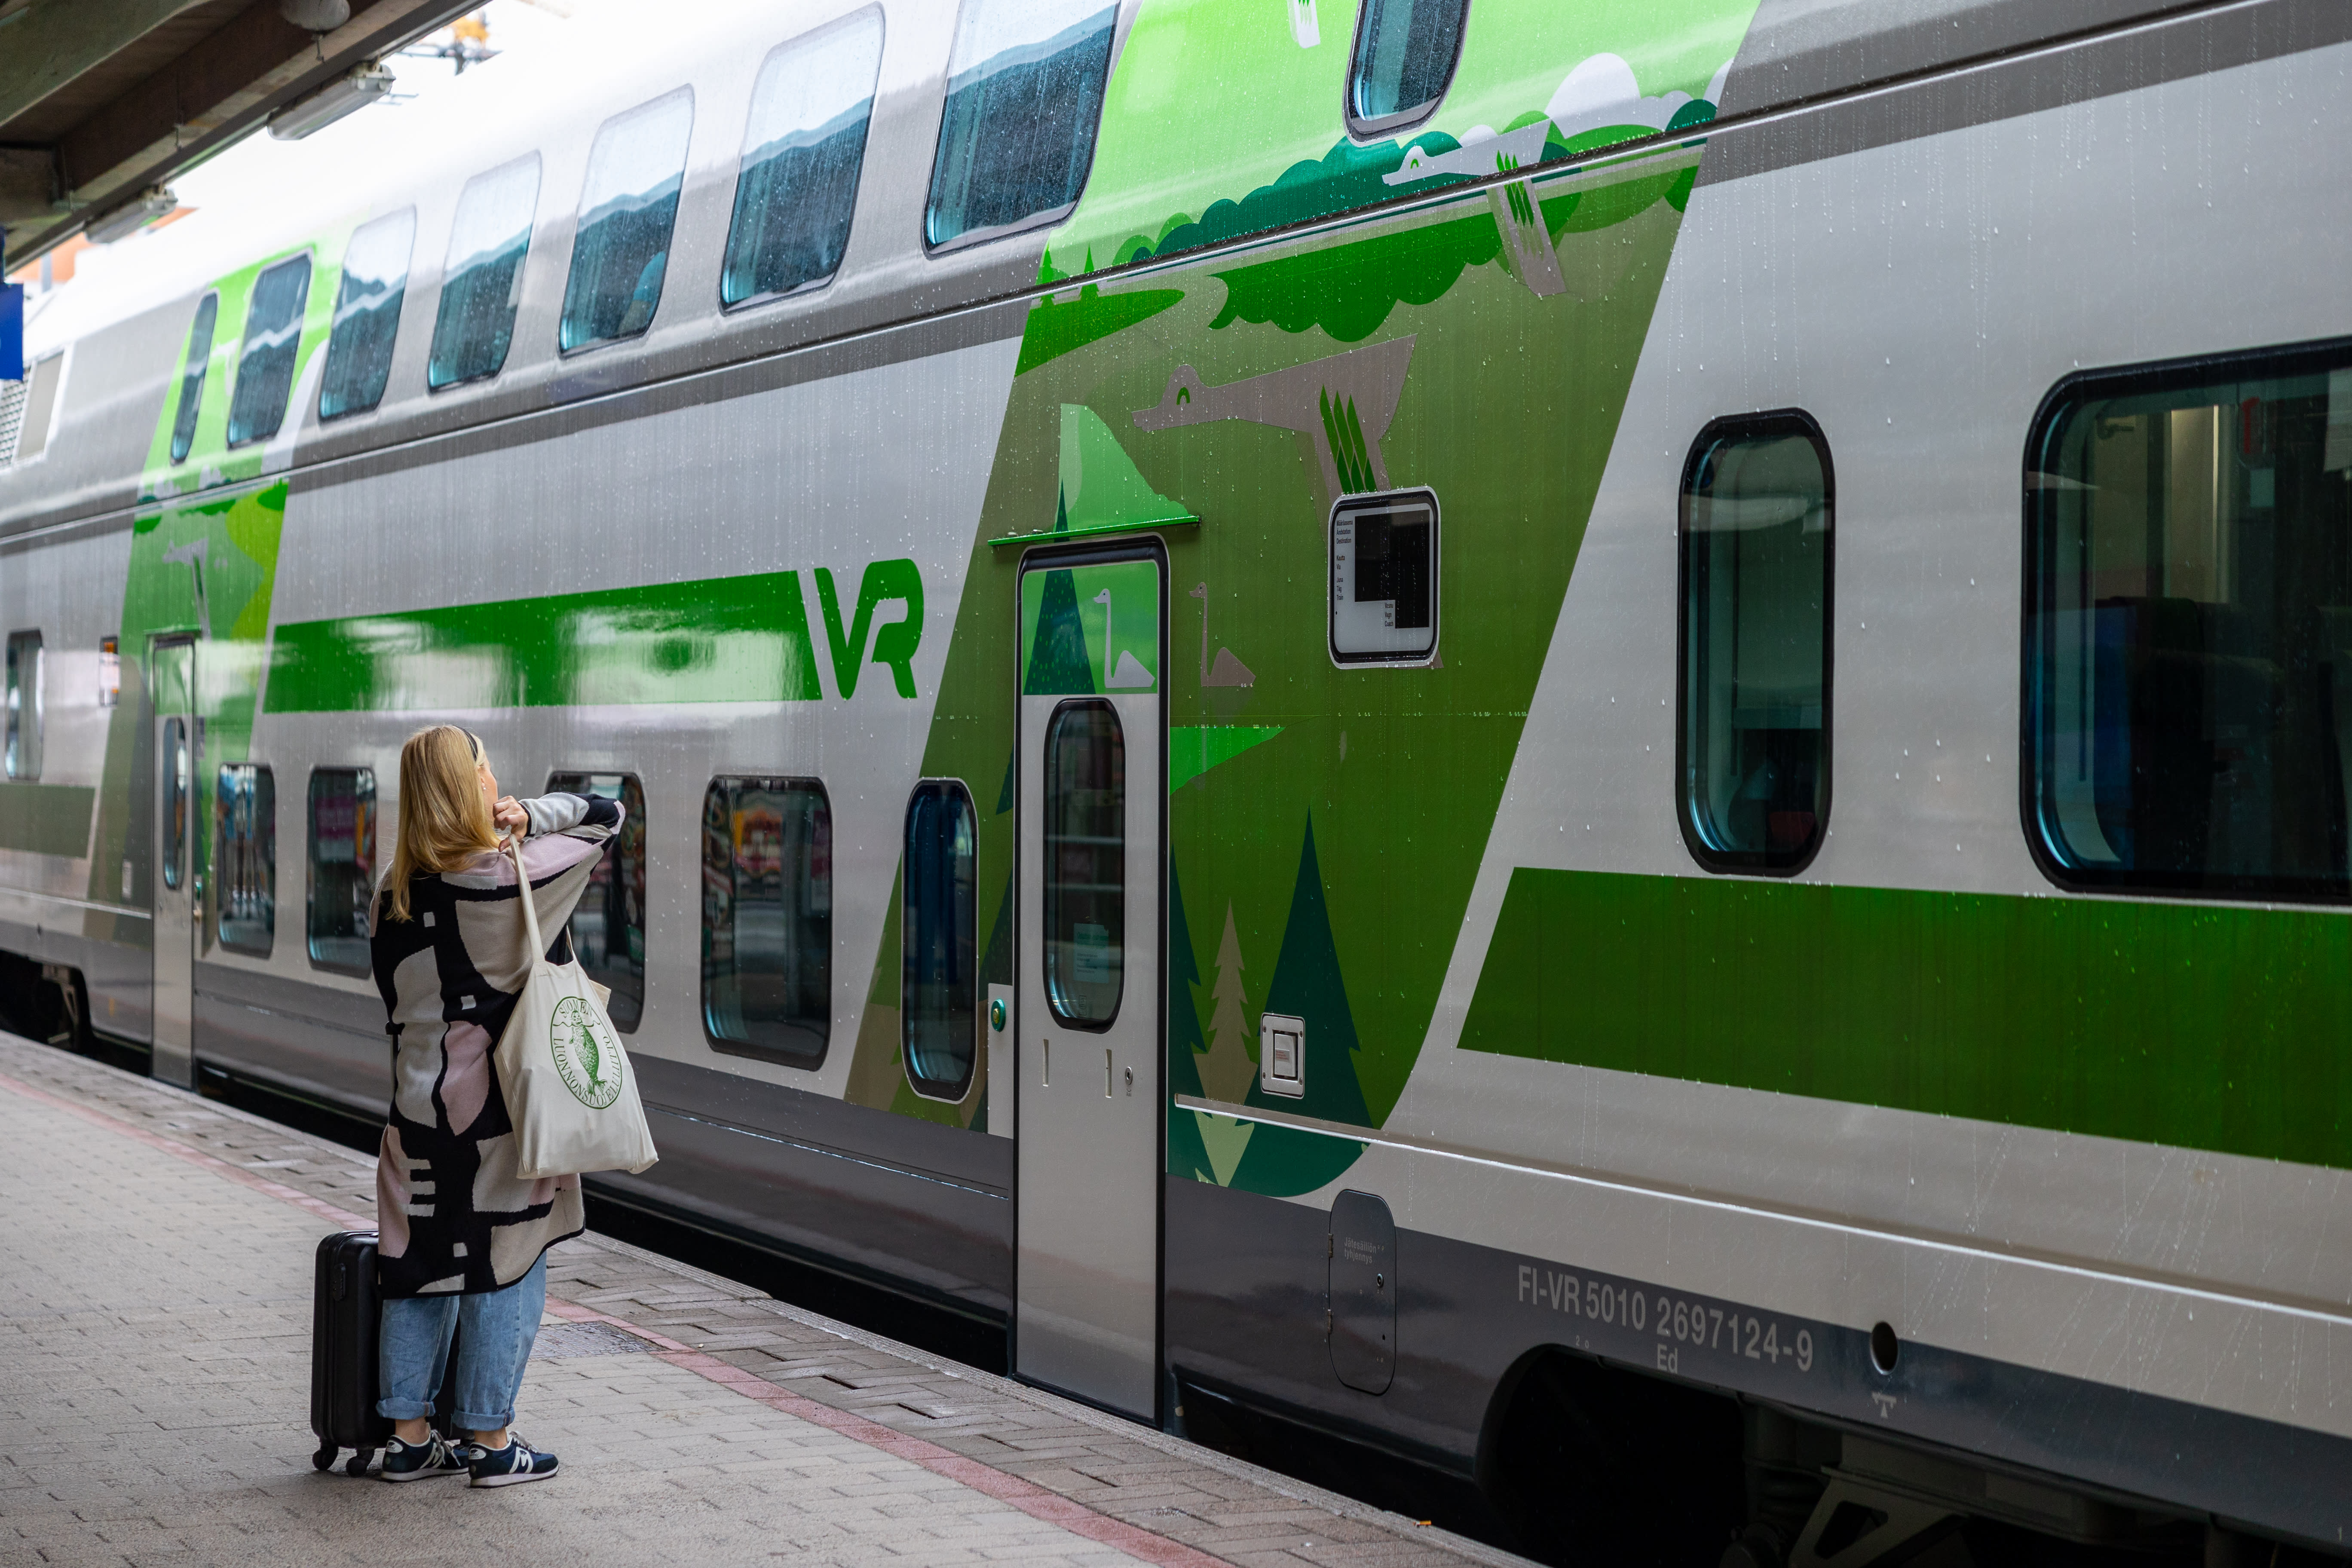 Train delays are expected throughout Finland due to the power outage on the Helsinki line